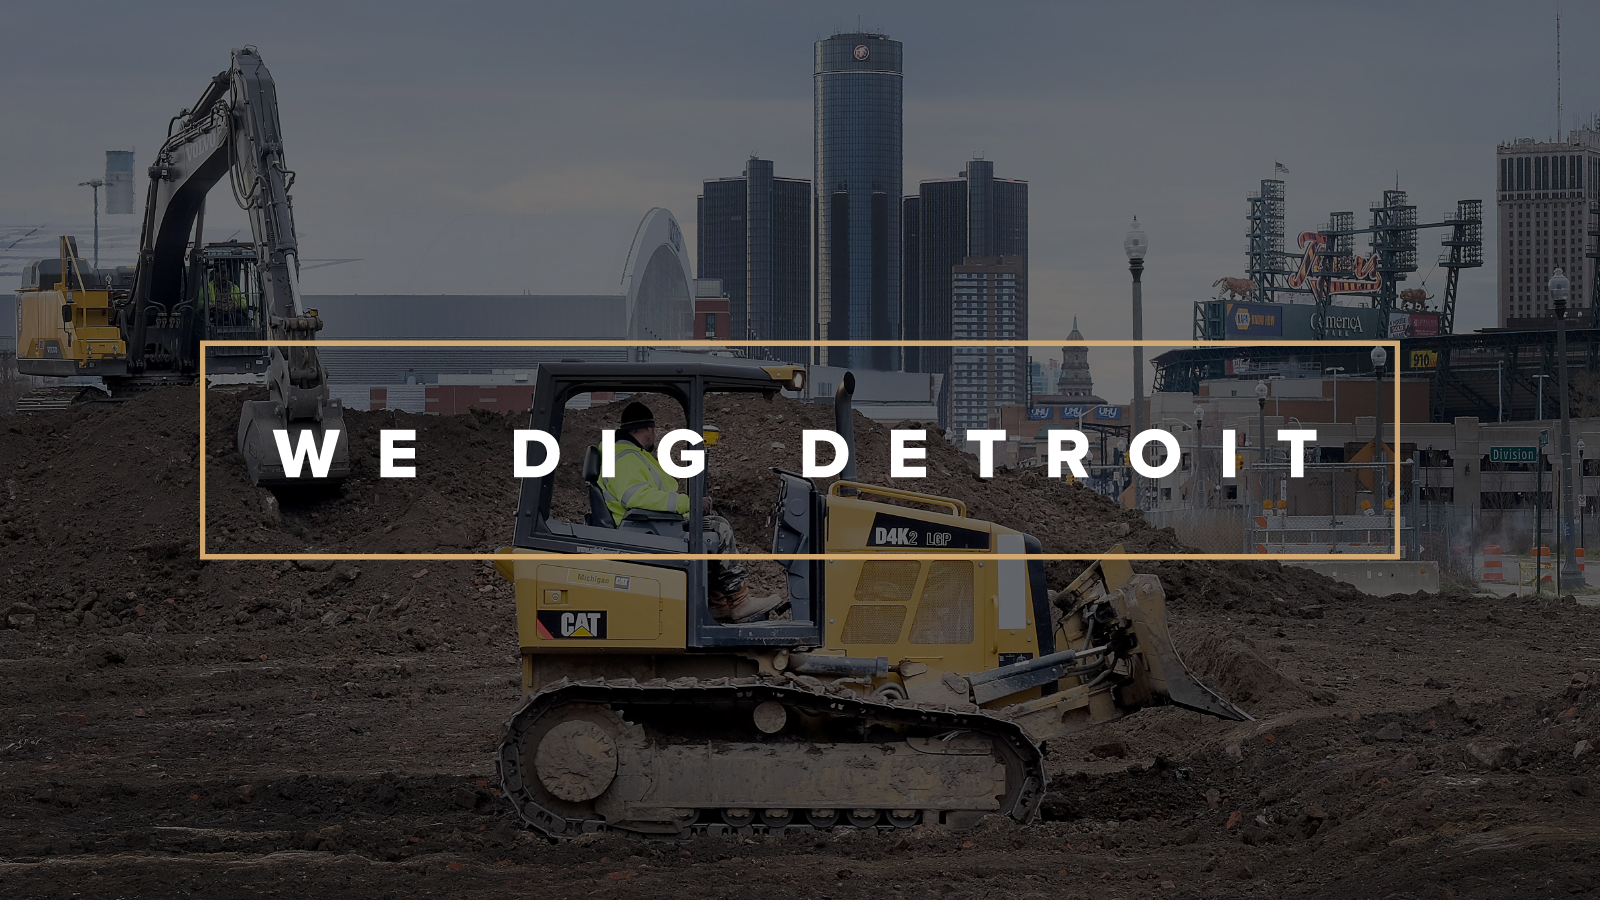 An excavator moving dirt in front of the Detroit skyline